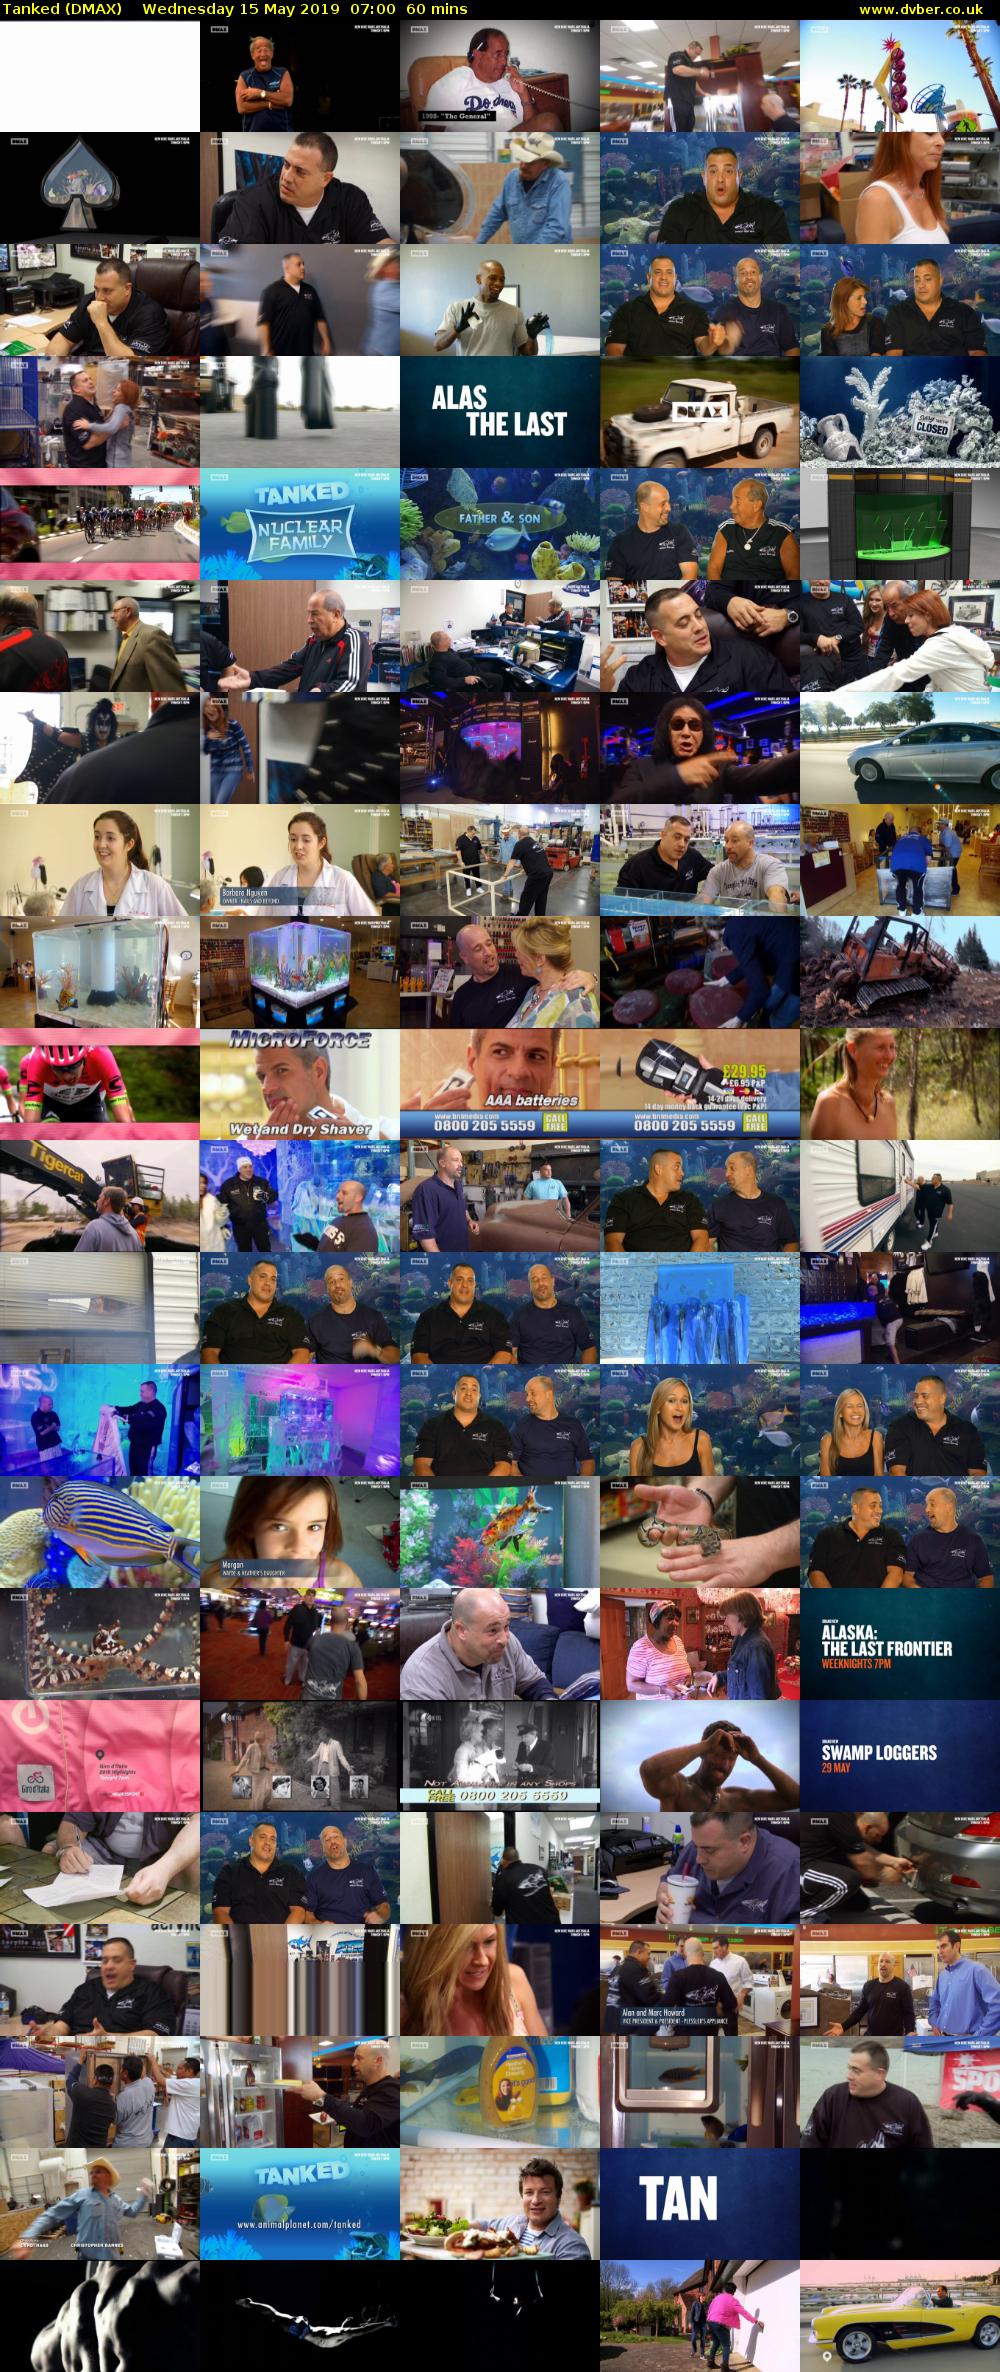 Tanked (DMAX) Wednesday 15 May 2019 07:00 - 08:00